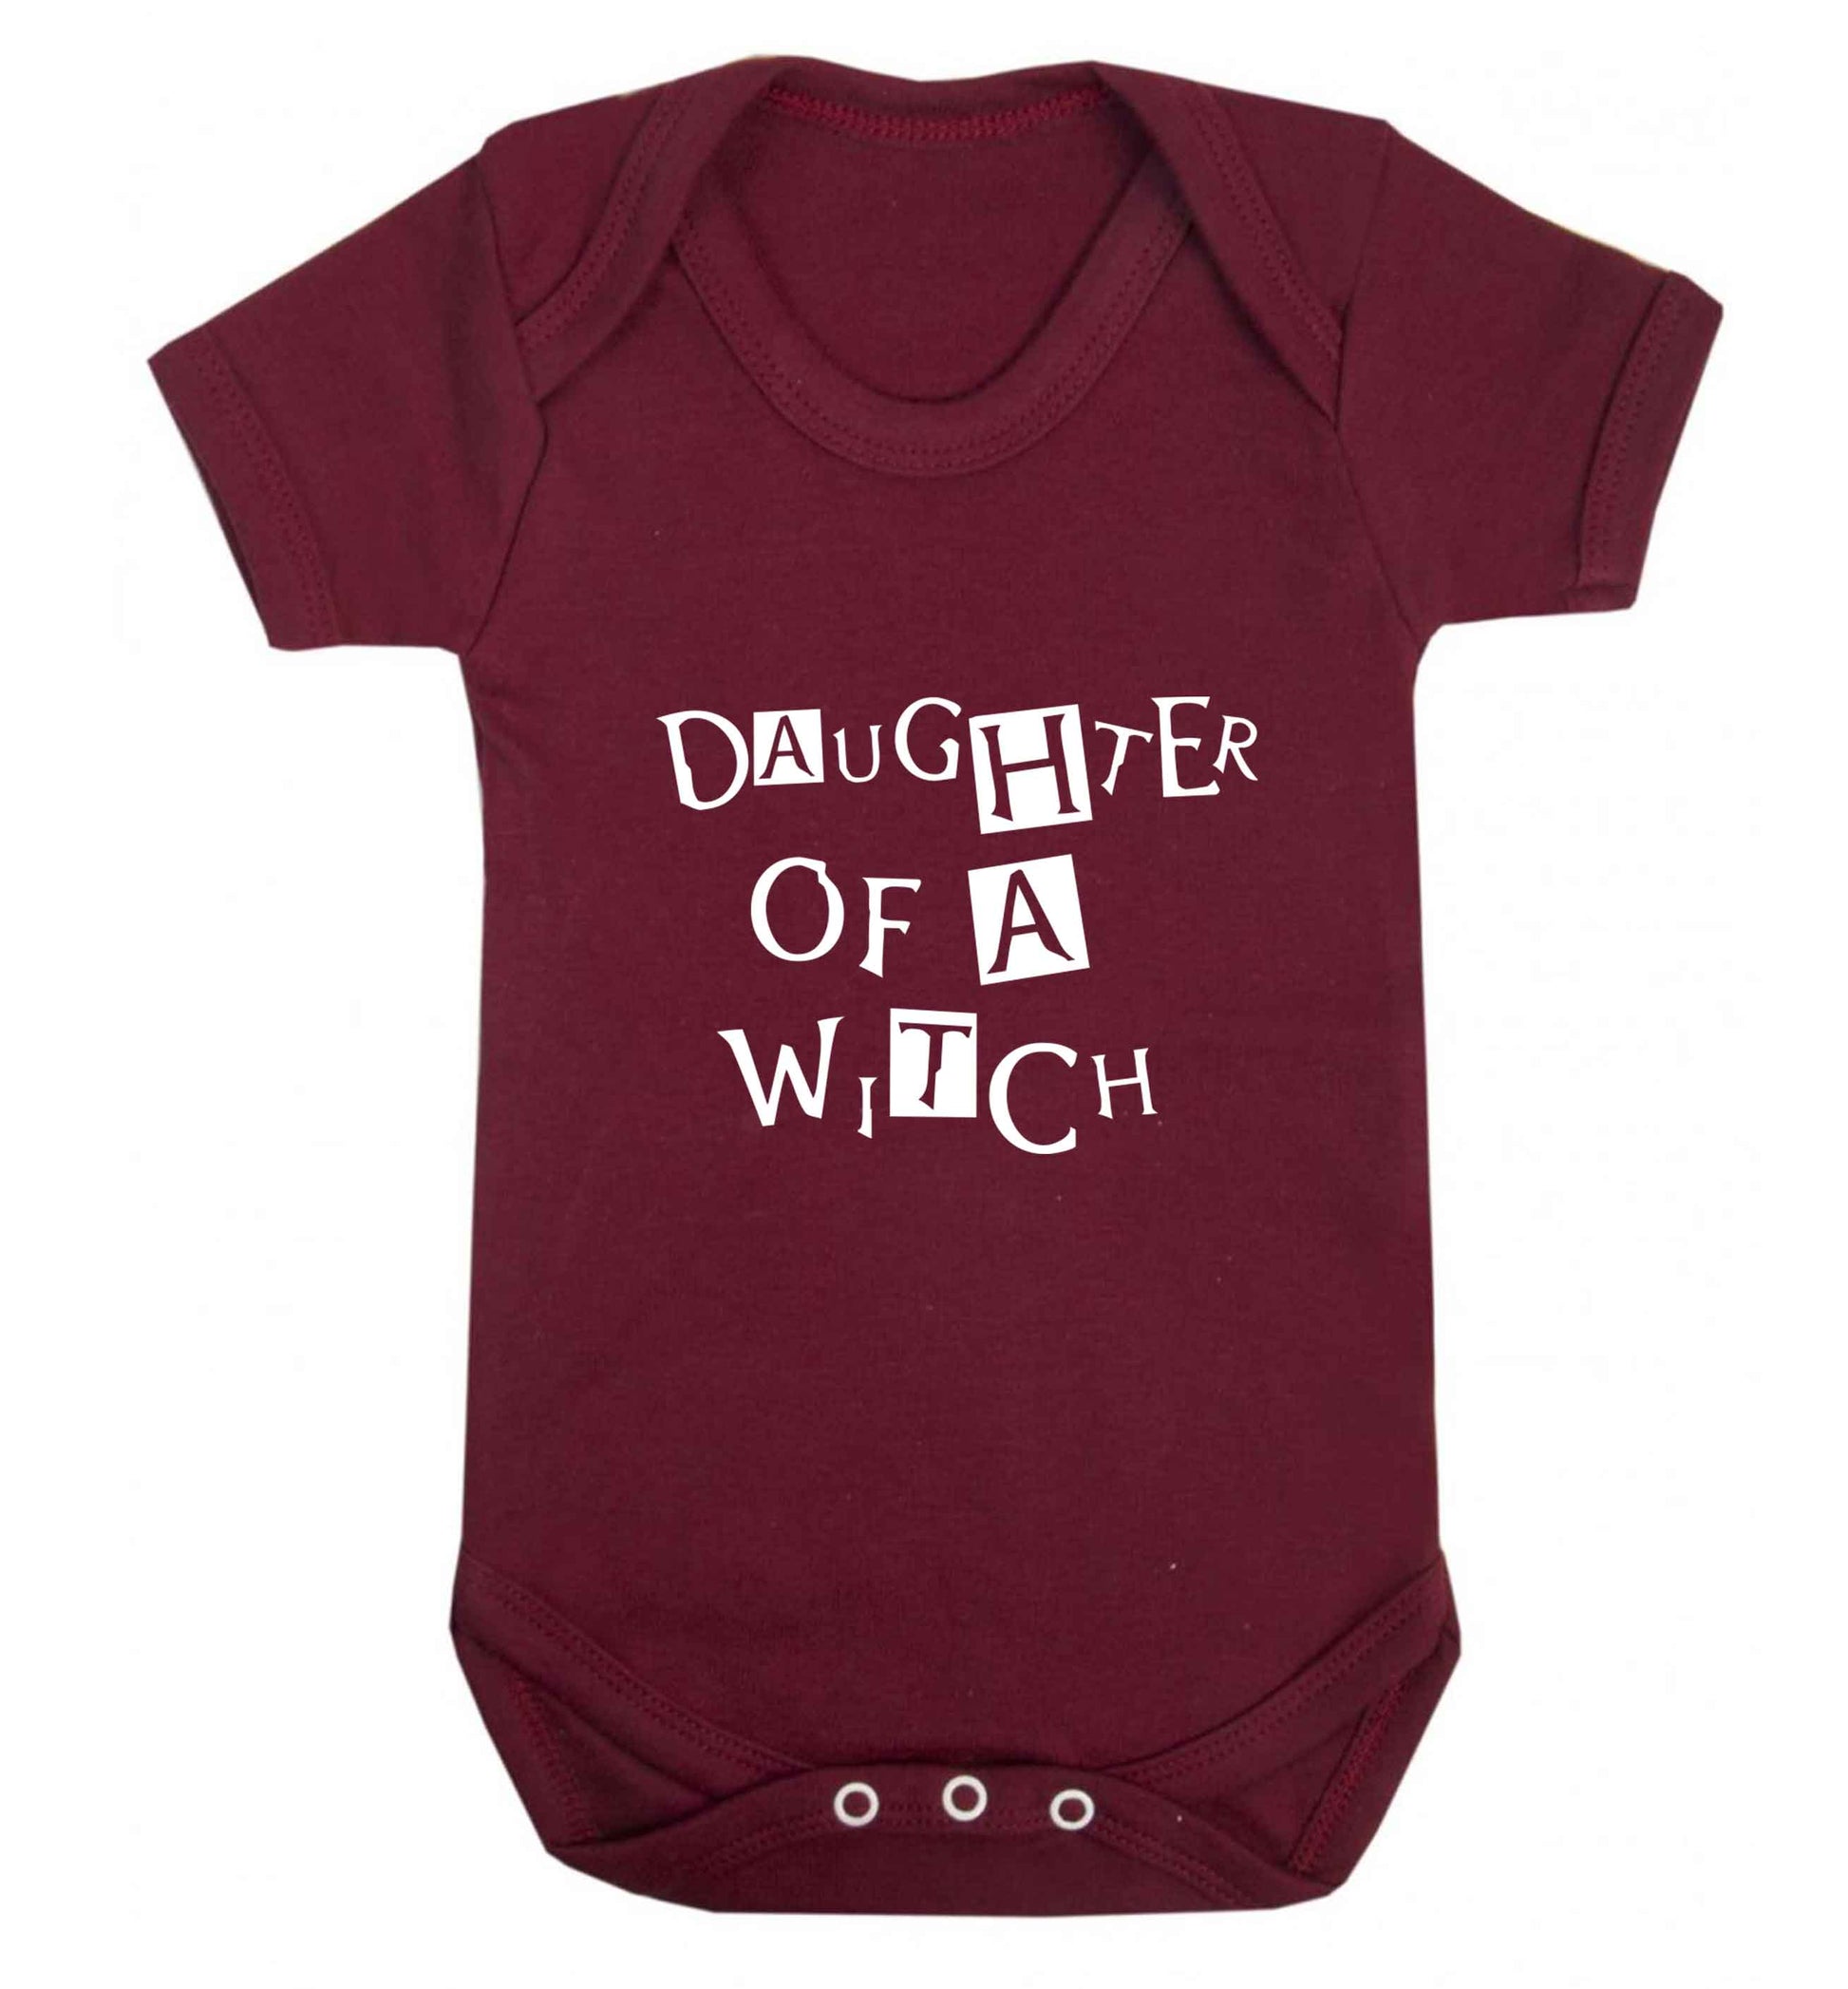 Daughter of a witch baby vest maroon 18-24 months